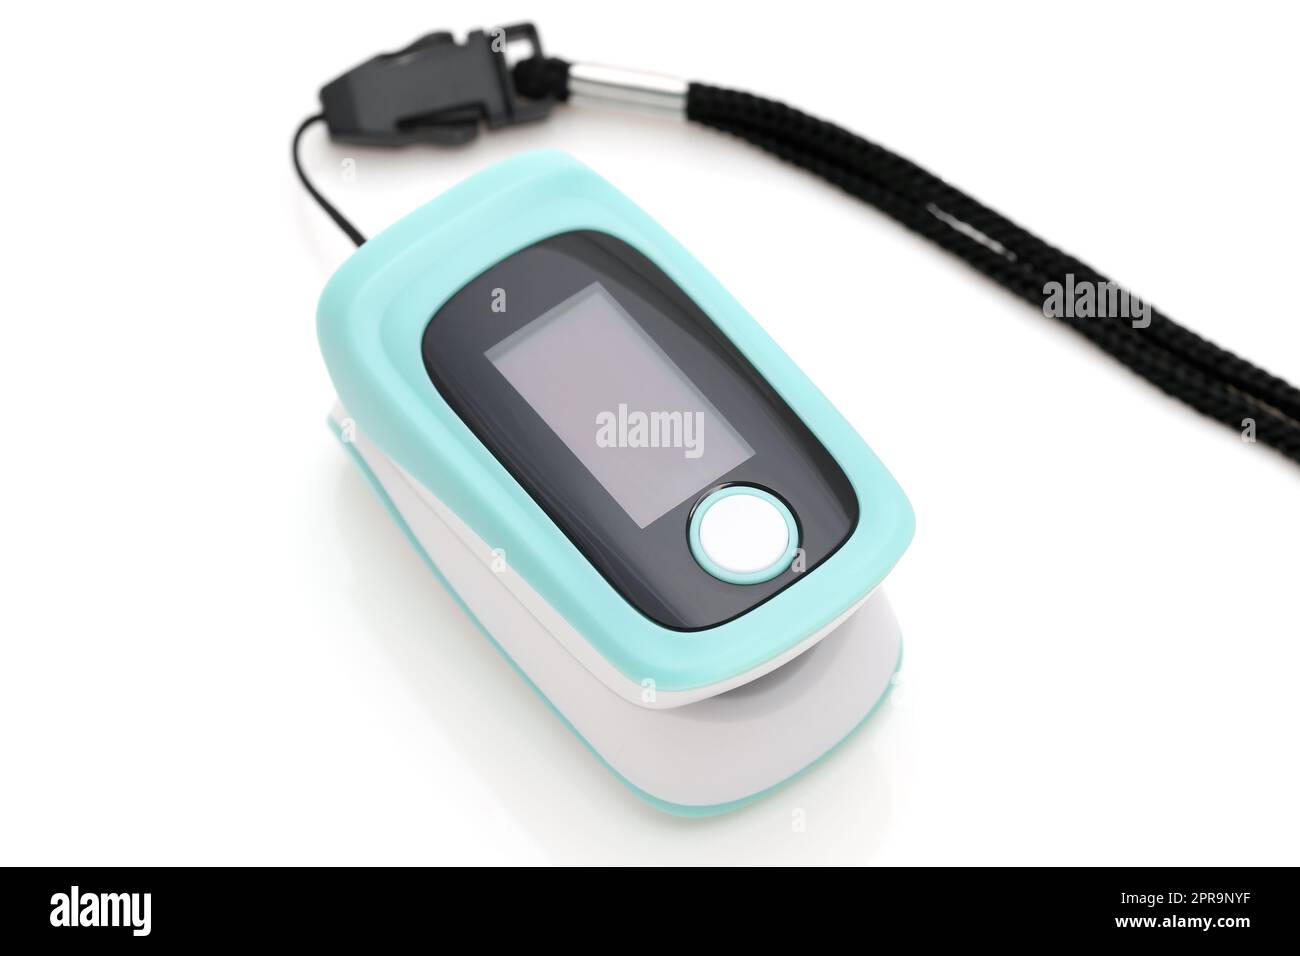 Pulse oximeter device on white background, healthcare monitoring concept Stock Photo